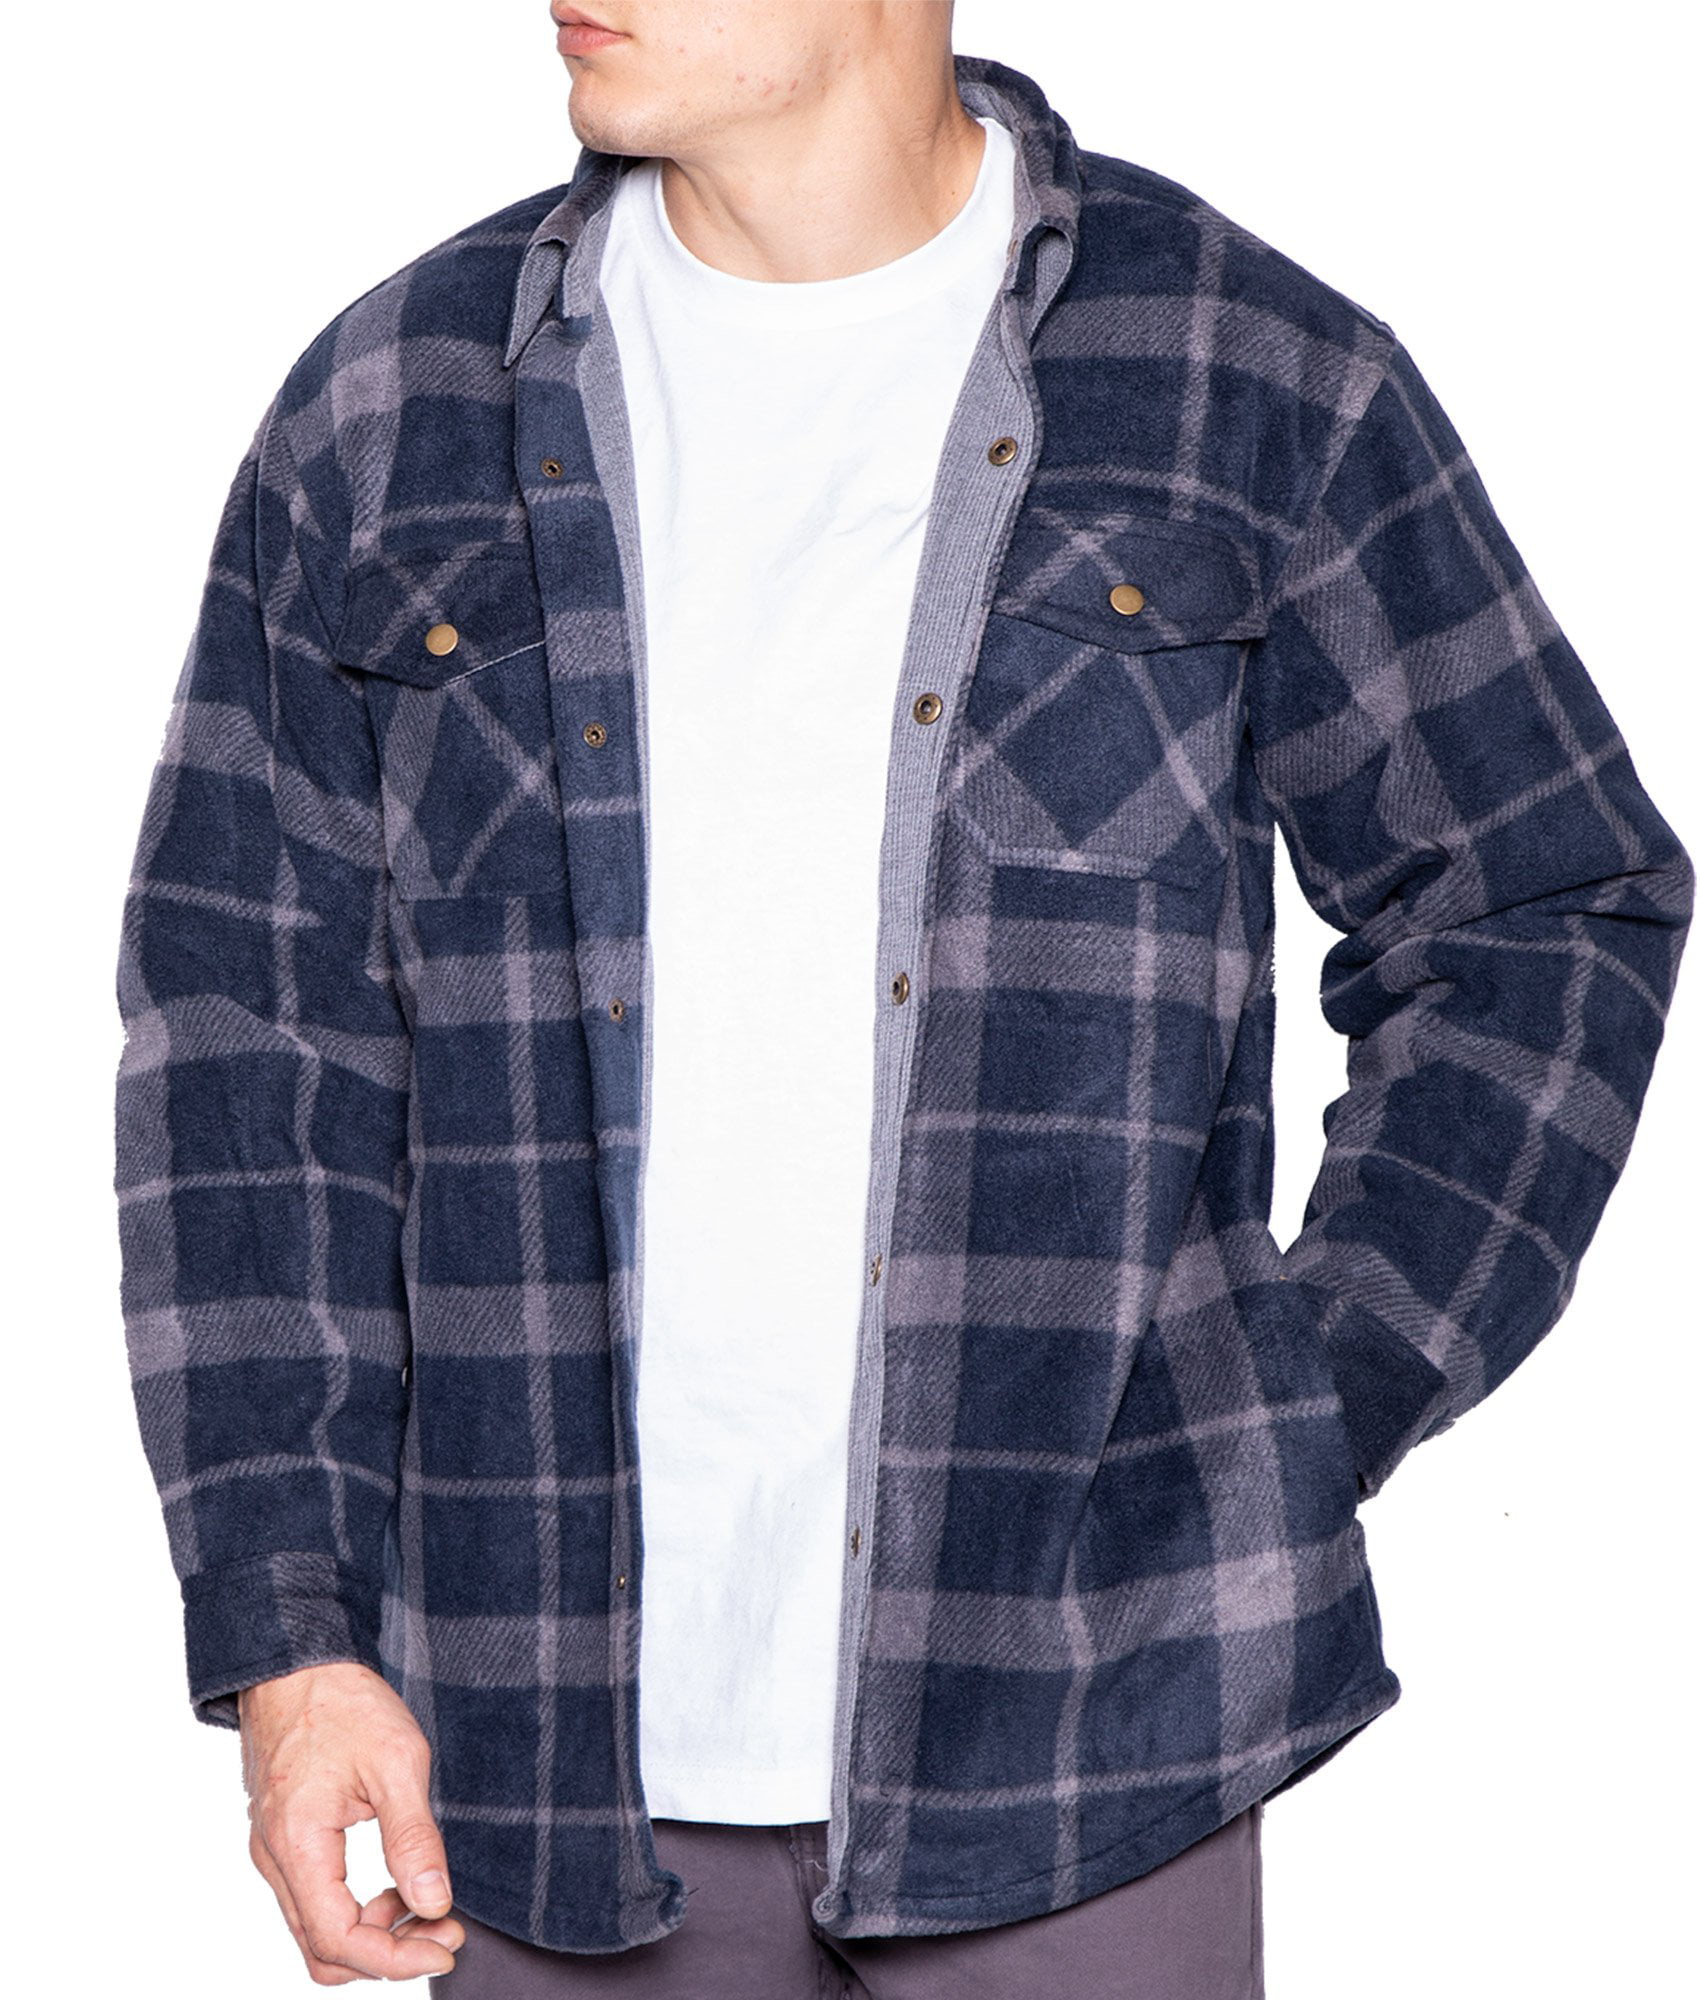 Maxxsel - Flannel Shirt Jackets for Men Big And Tall Heavy Quilted ...